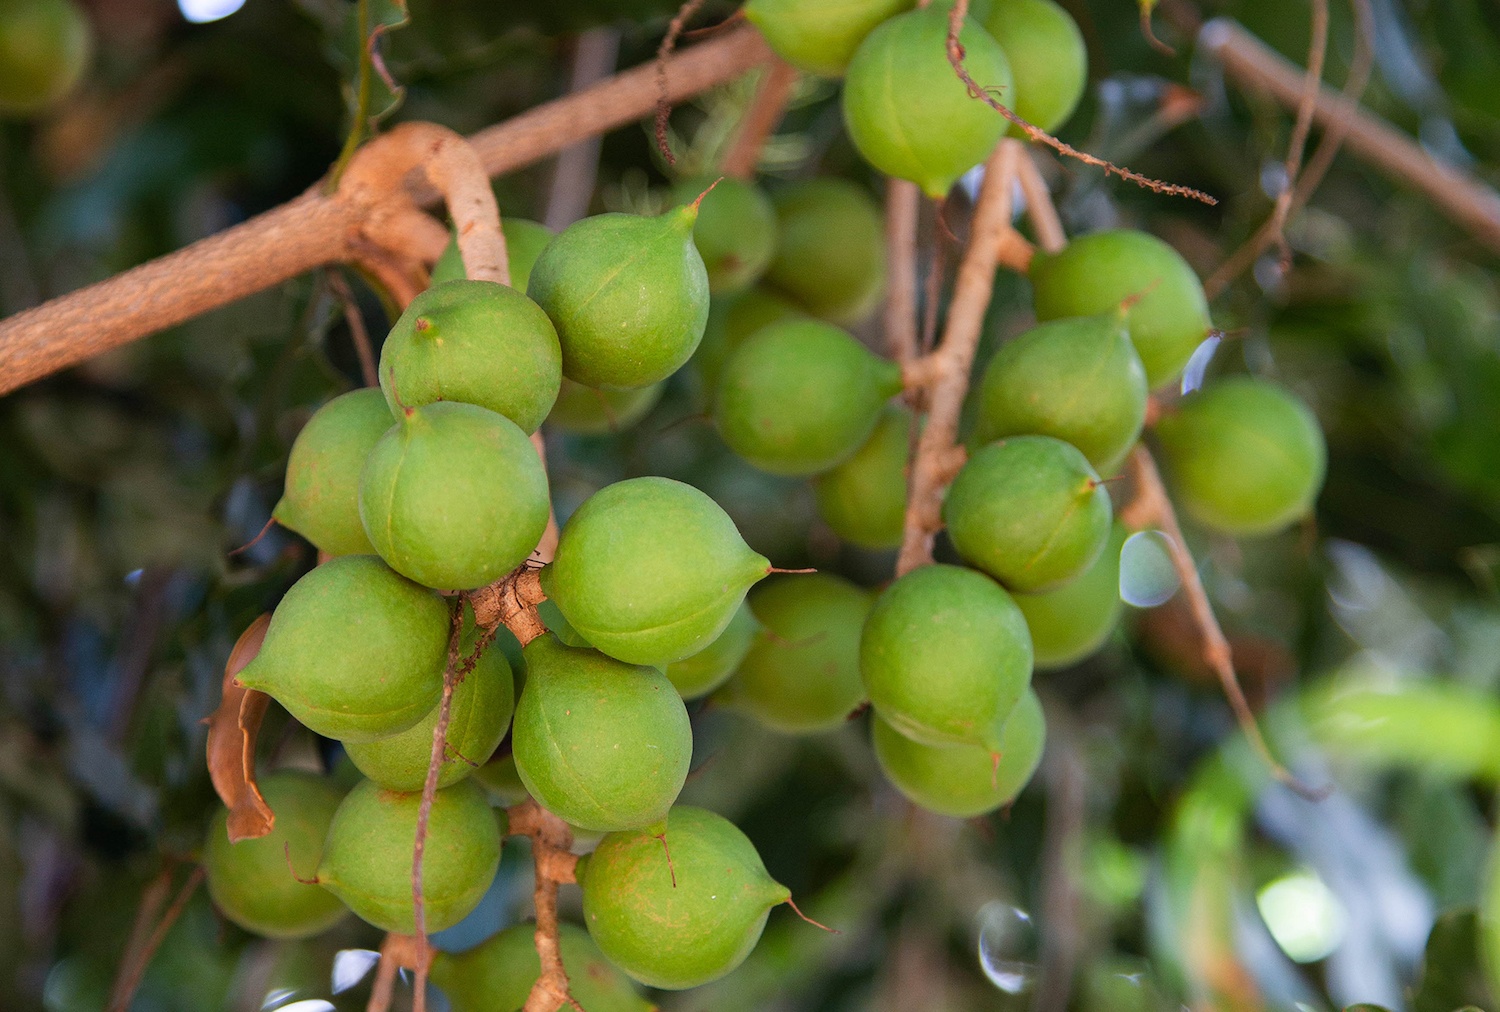 Tree crops like macadamia nuts can help reduce the amount of carbon in the atmosphere.